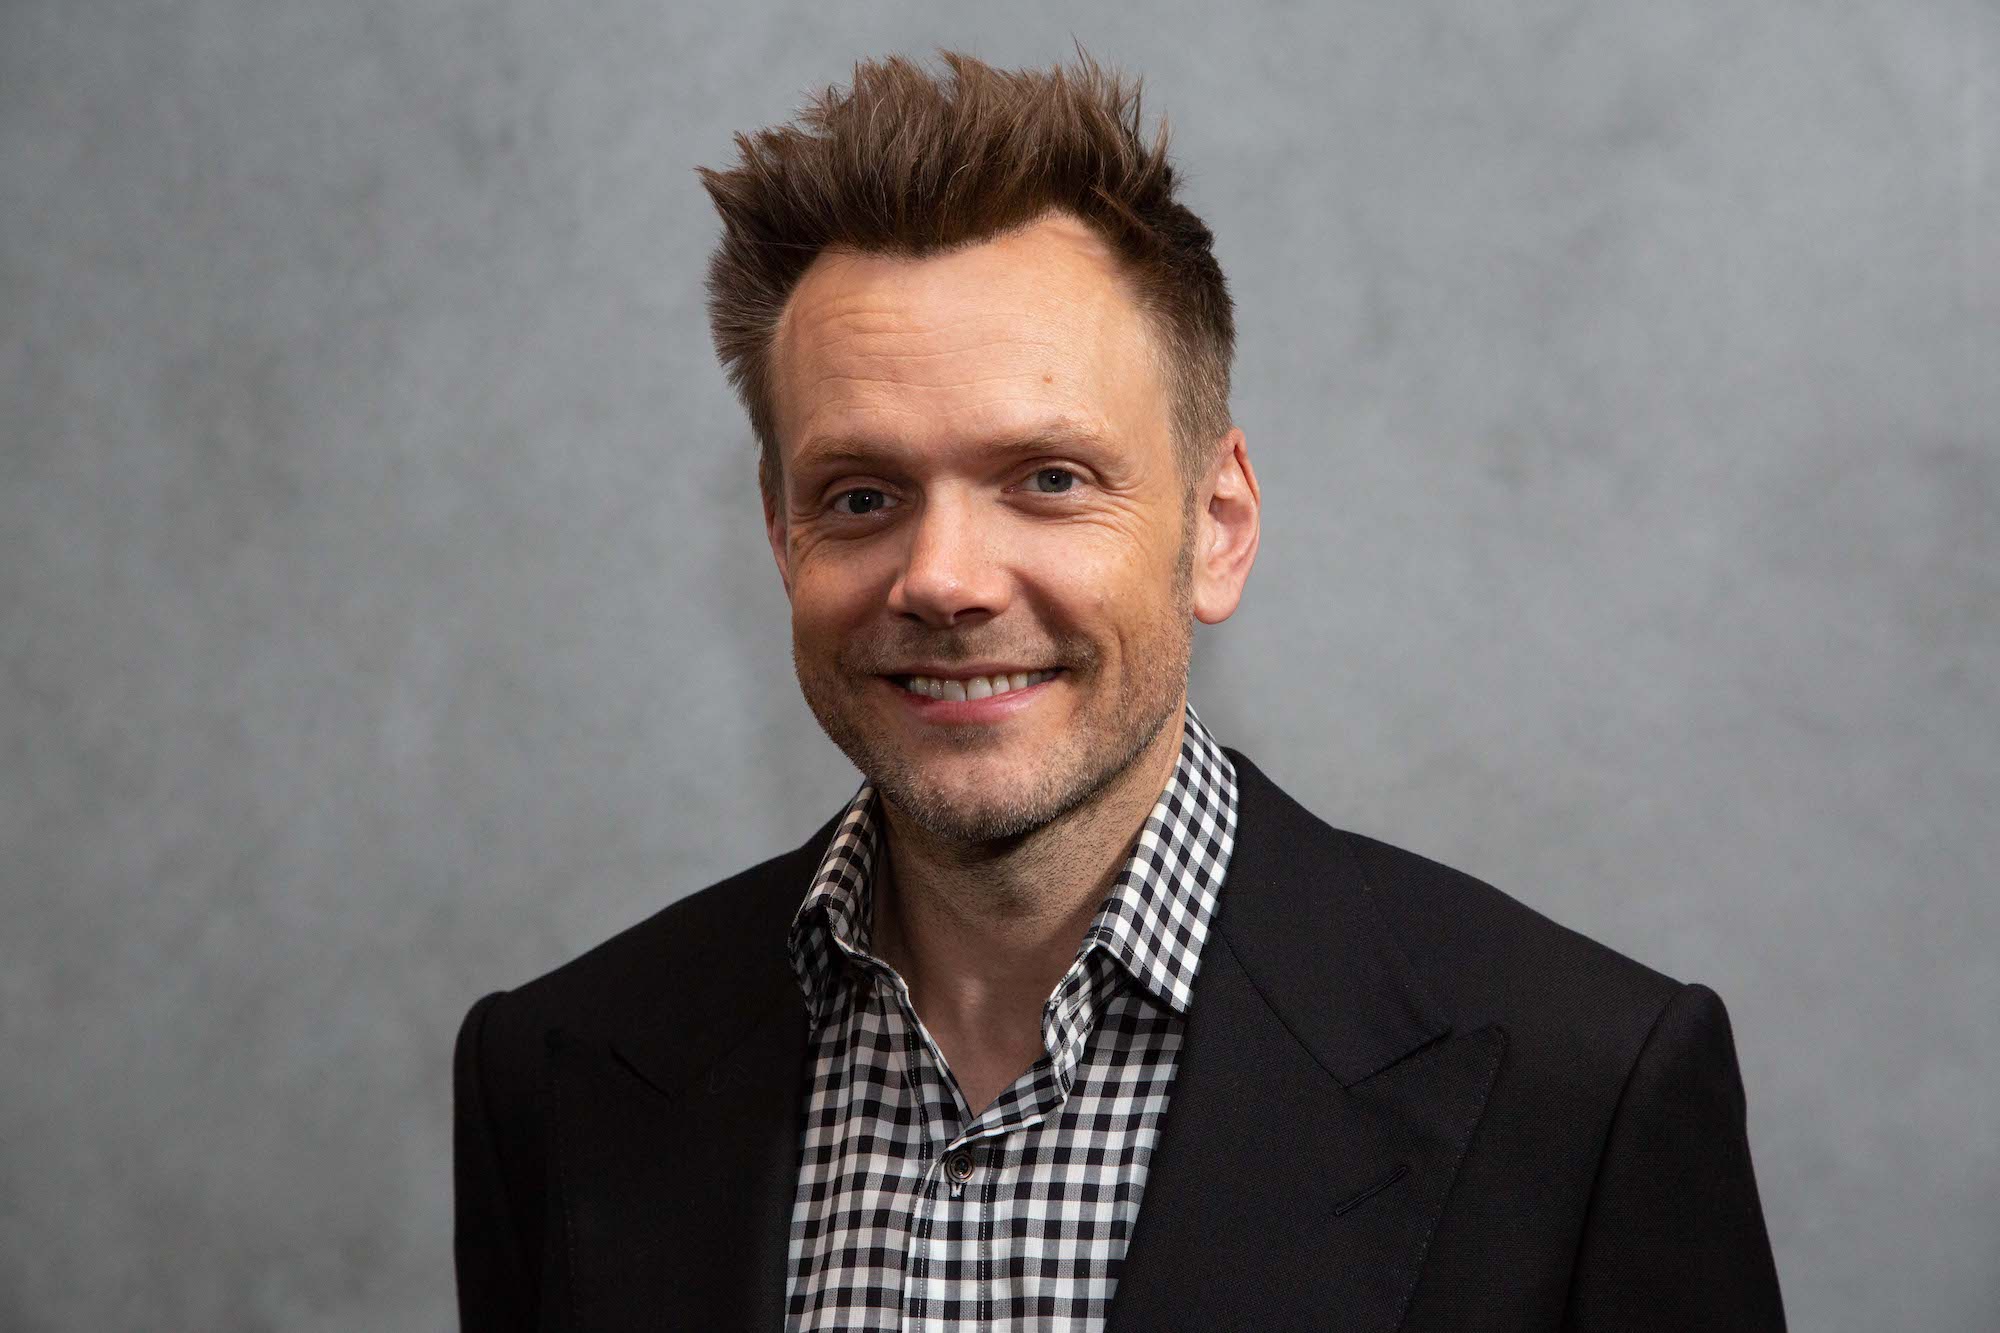 Community' Star Joel McHale Needed 3 Hair Transplant Surgeries to Feel Like  Himself: 'I'd Be Totally Bald'